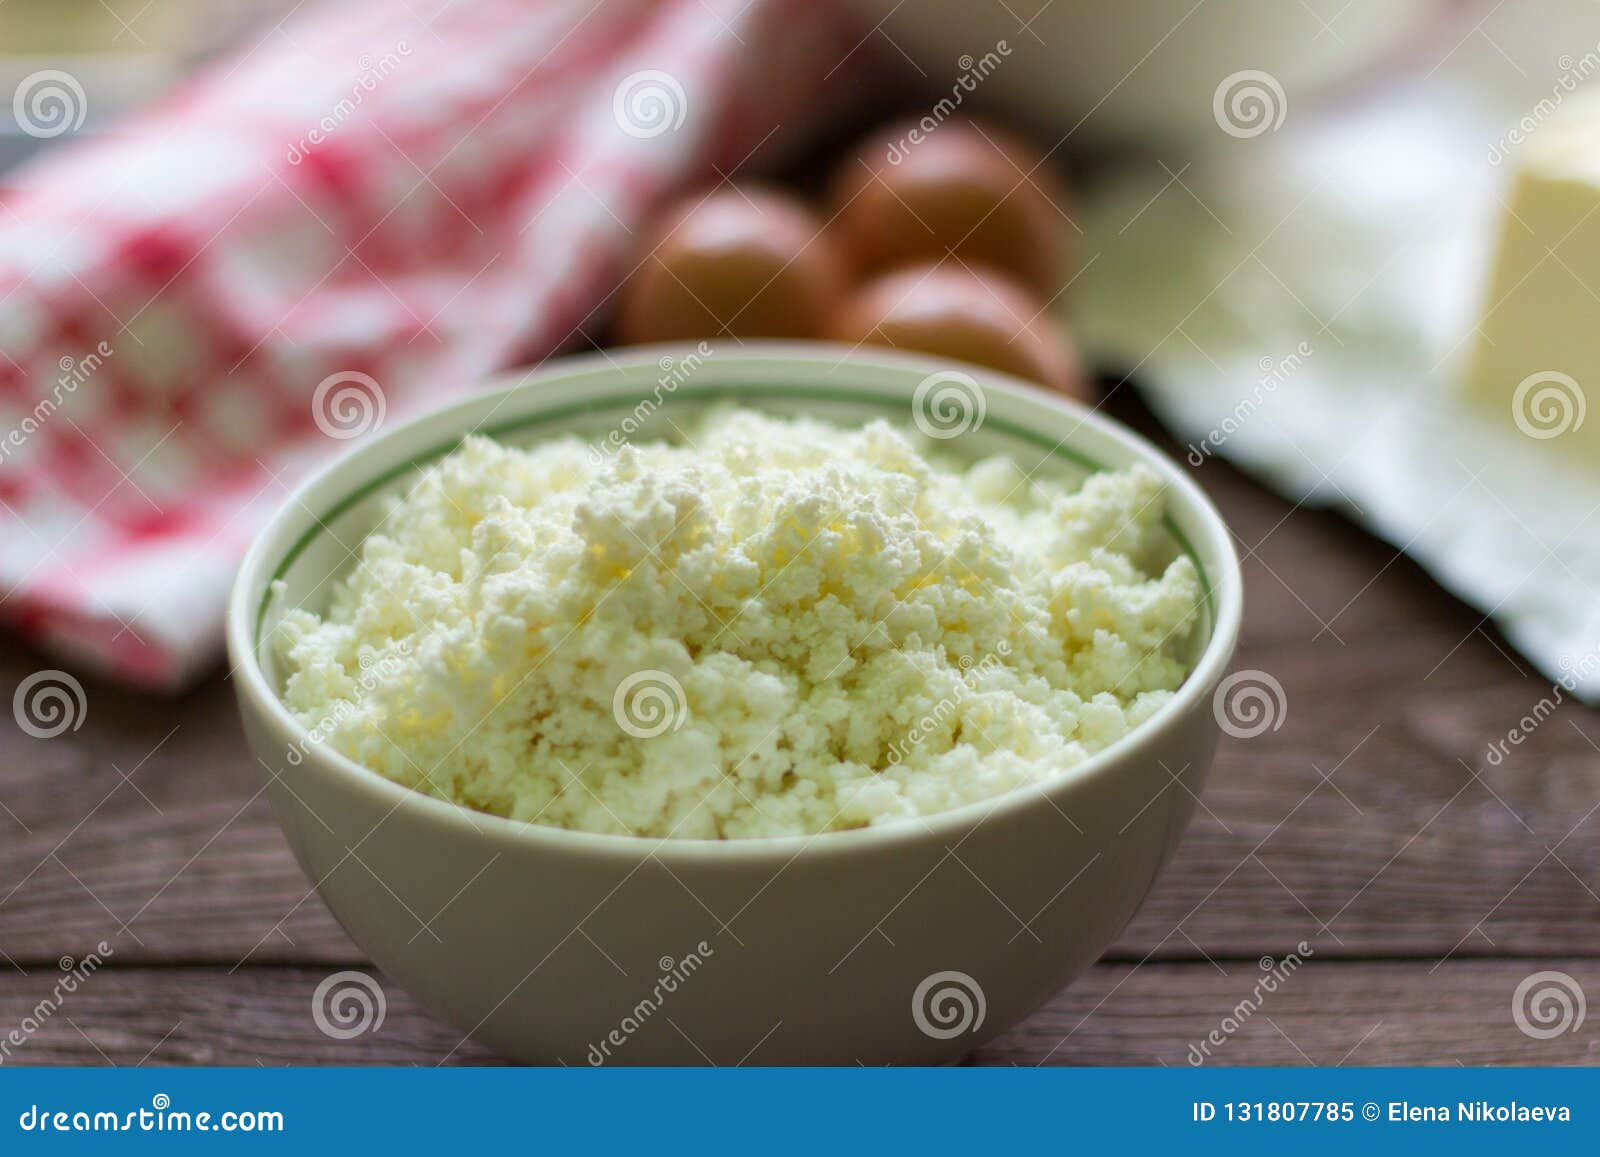 Fresh Cottage Cheese And Eggs On The Table Baking Ingredients